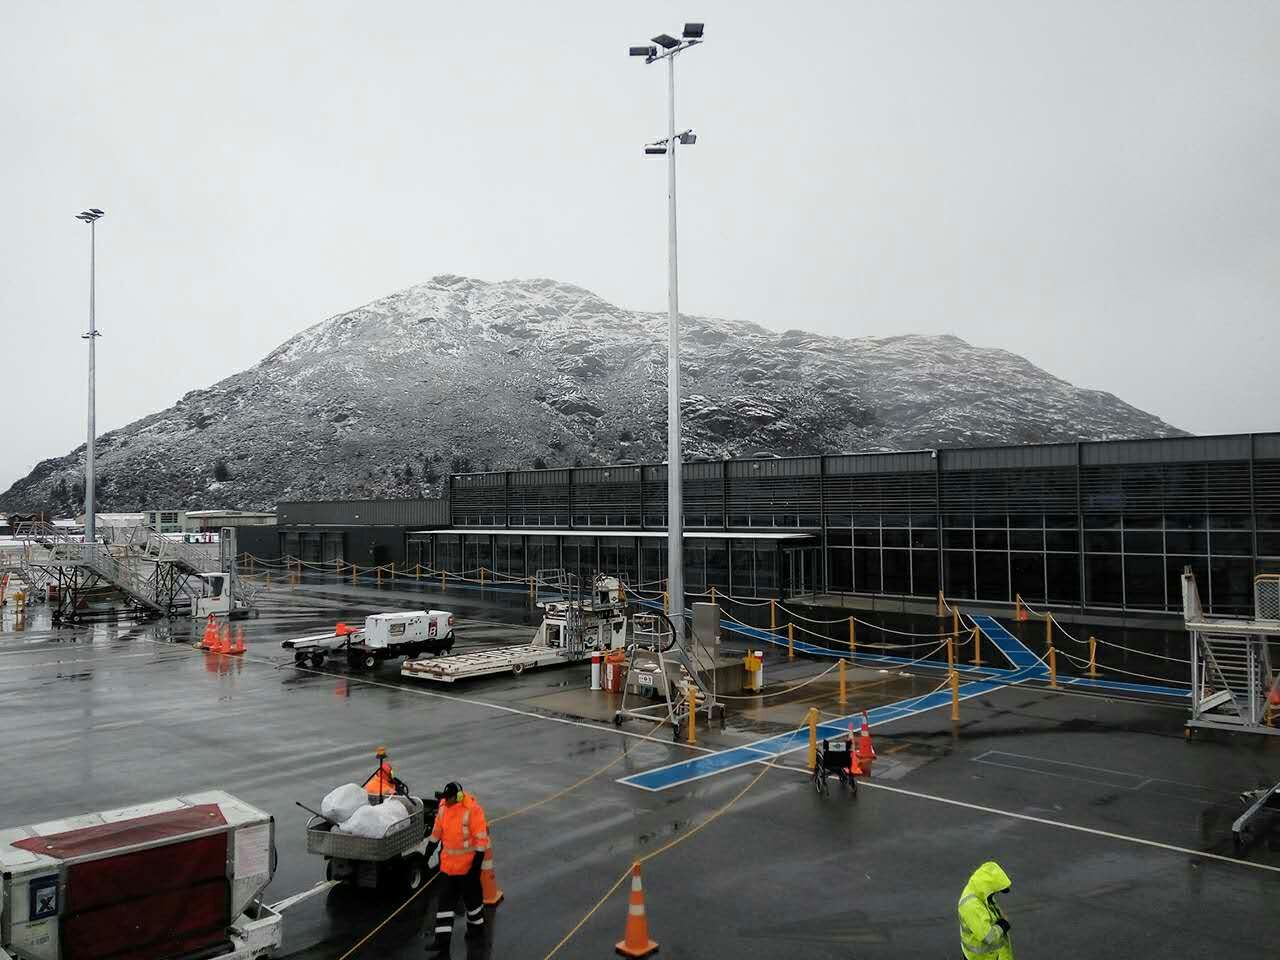 Queenstown airport - boarding time. what happens if you miss your flight? A memorable snowfall?